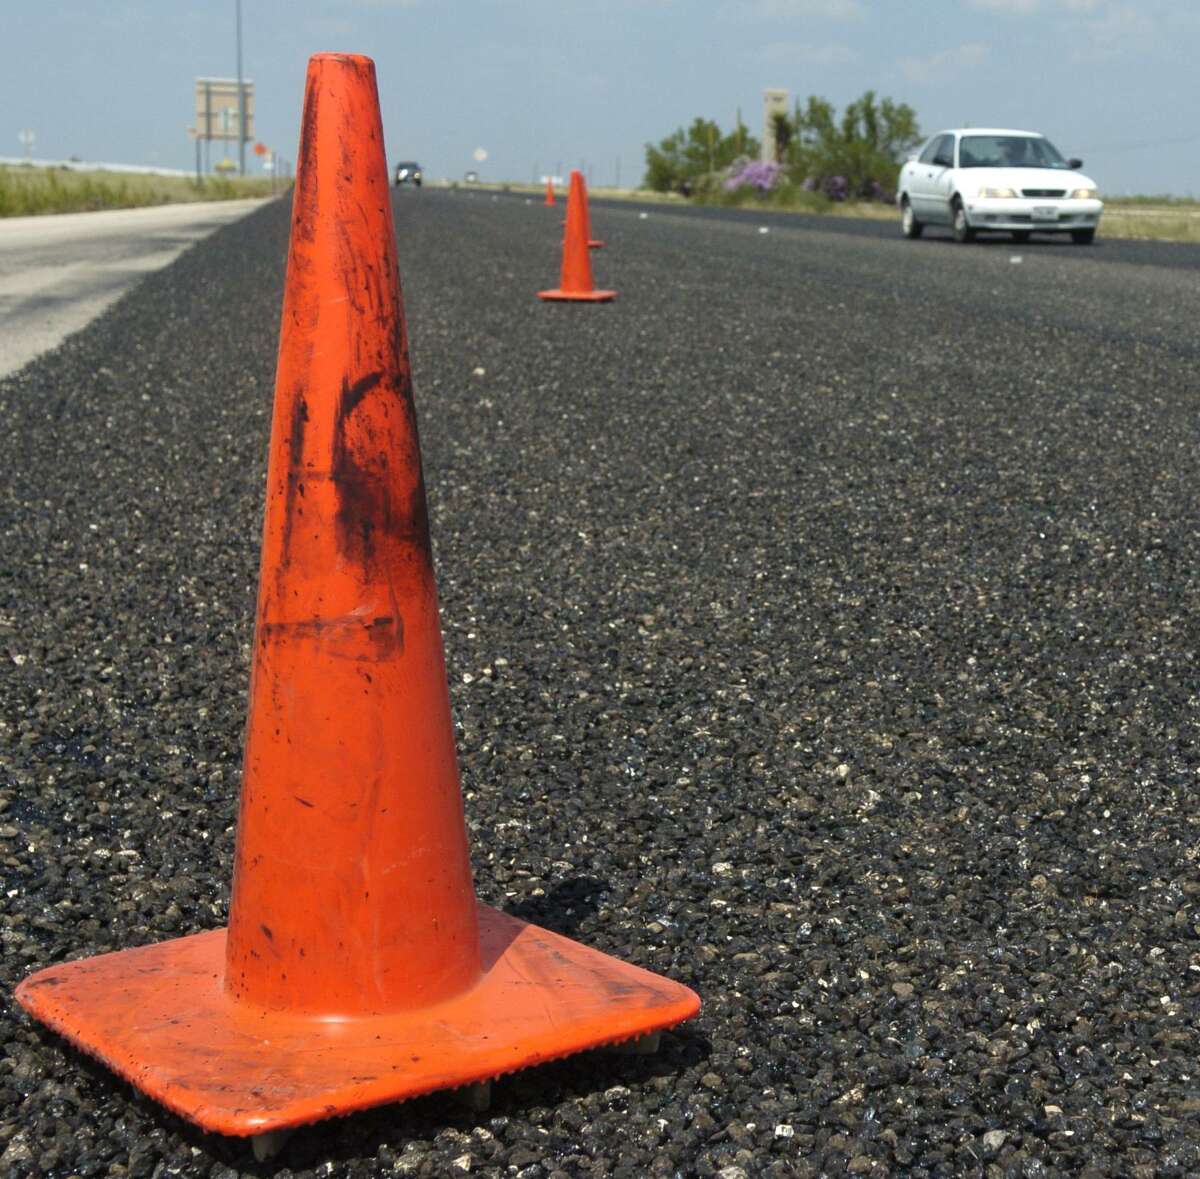 Miles of orange cones line Highway 191 limiting traffic to one lane from Midland to Odessa as TXDOT resurfaces the roadway. Photo by Tim FIscher 8/14/07